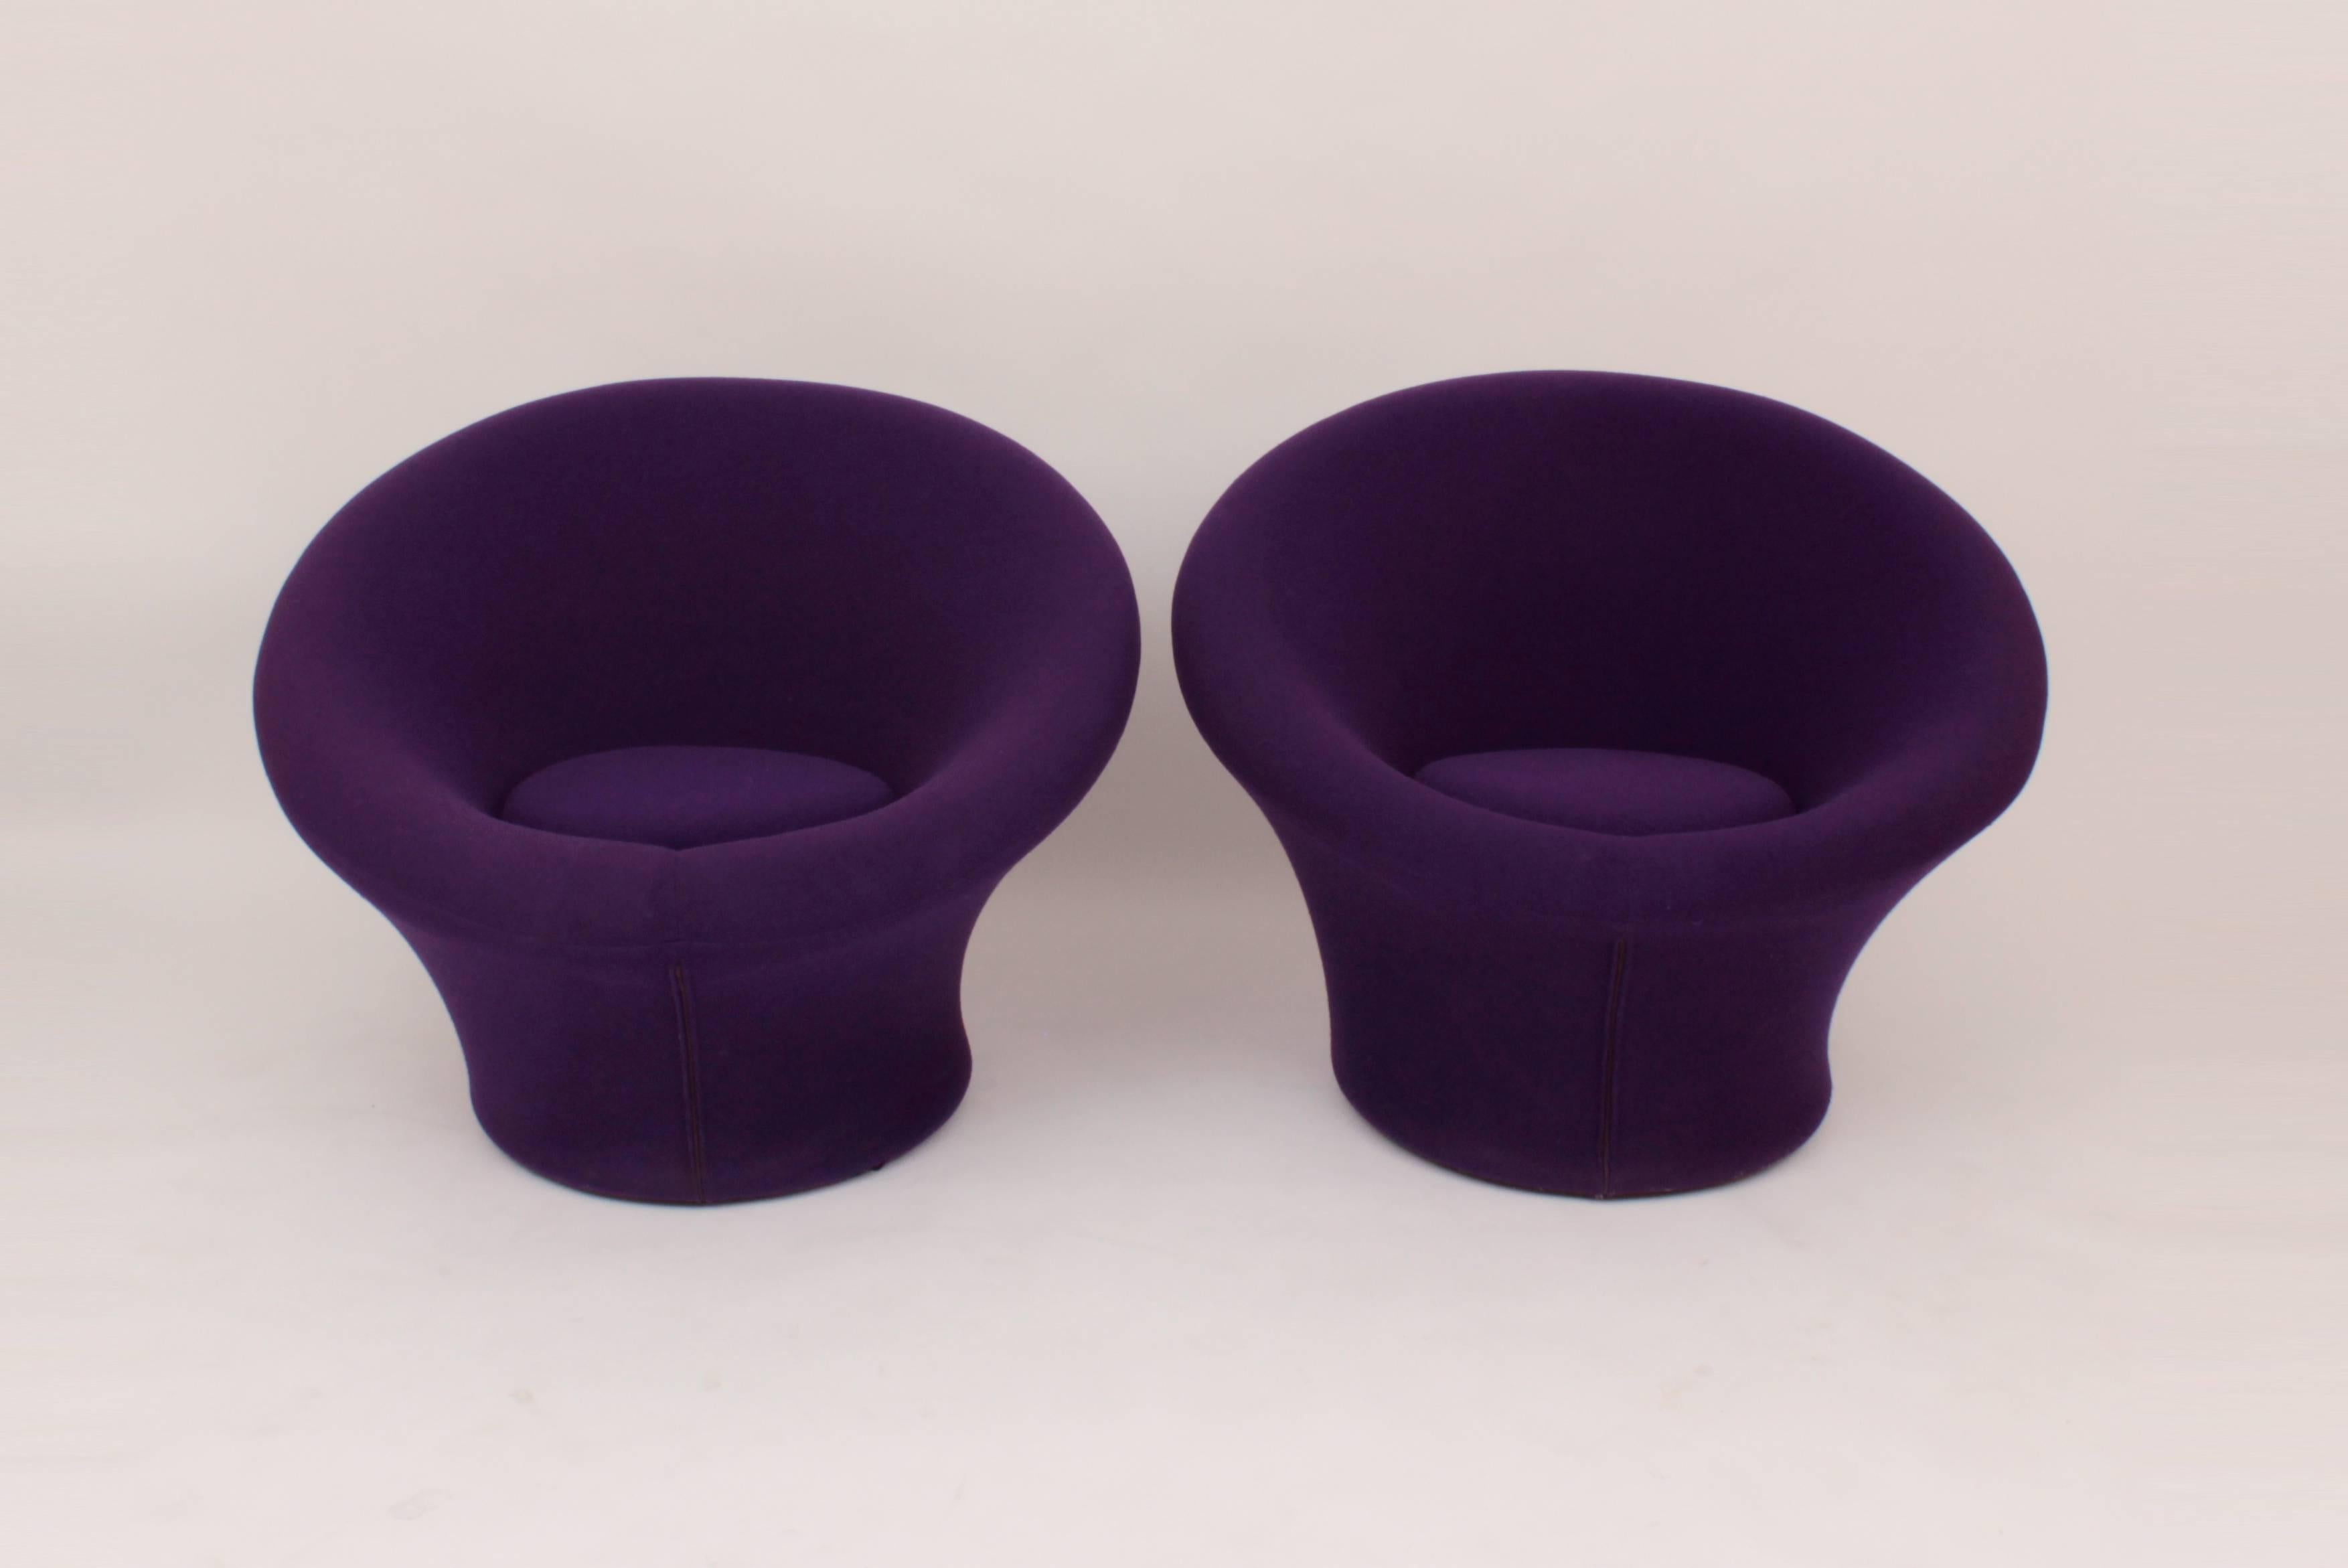 Iconic pair of Mushrooms lounge chairs designed by Pierre Paulin for Artifort in 1959.
Purple fabric, base in wood, foam and metal structure.

References:
Pierre Paulin, Un univers de formes, Anne Chapoutot, 1992.
Pierre Paulin, Elizabeth